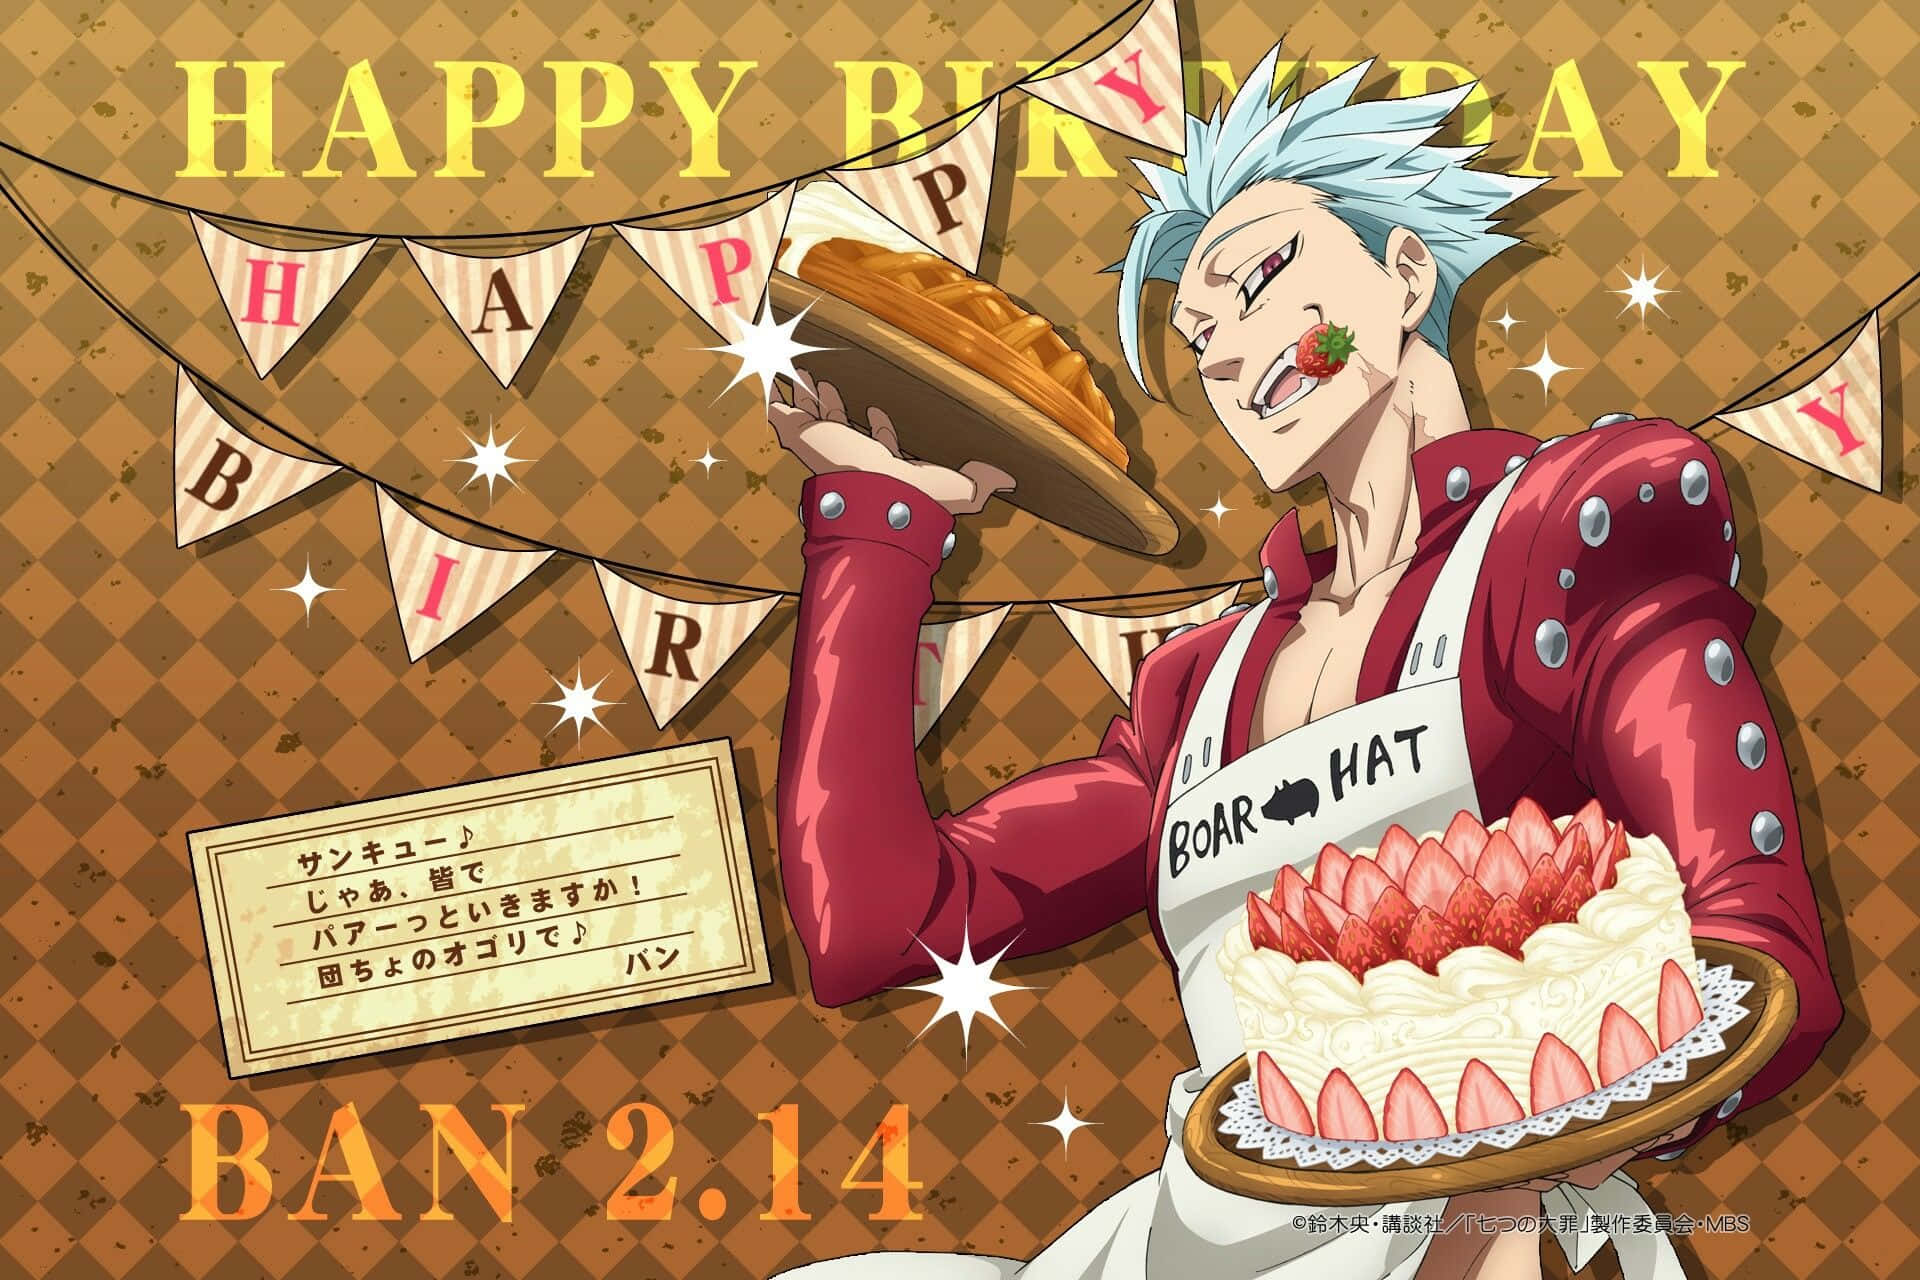 Sending wishes for a special birthday Wallpaper